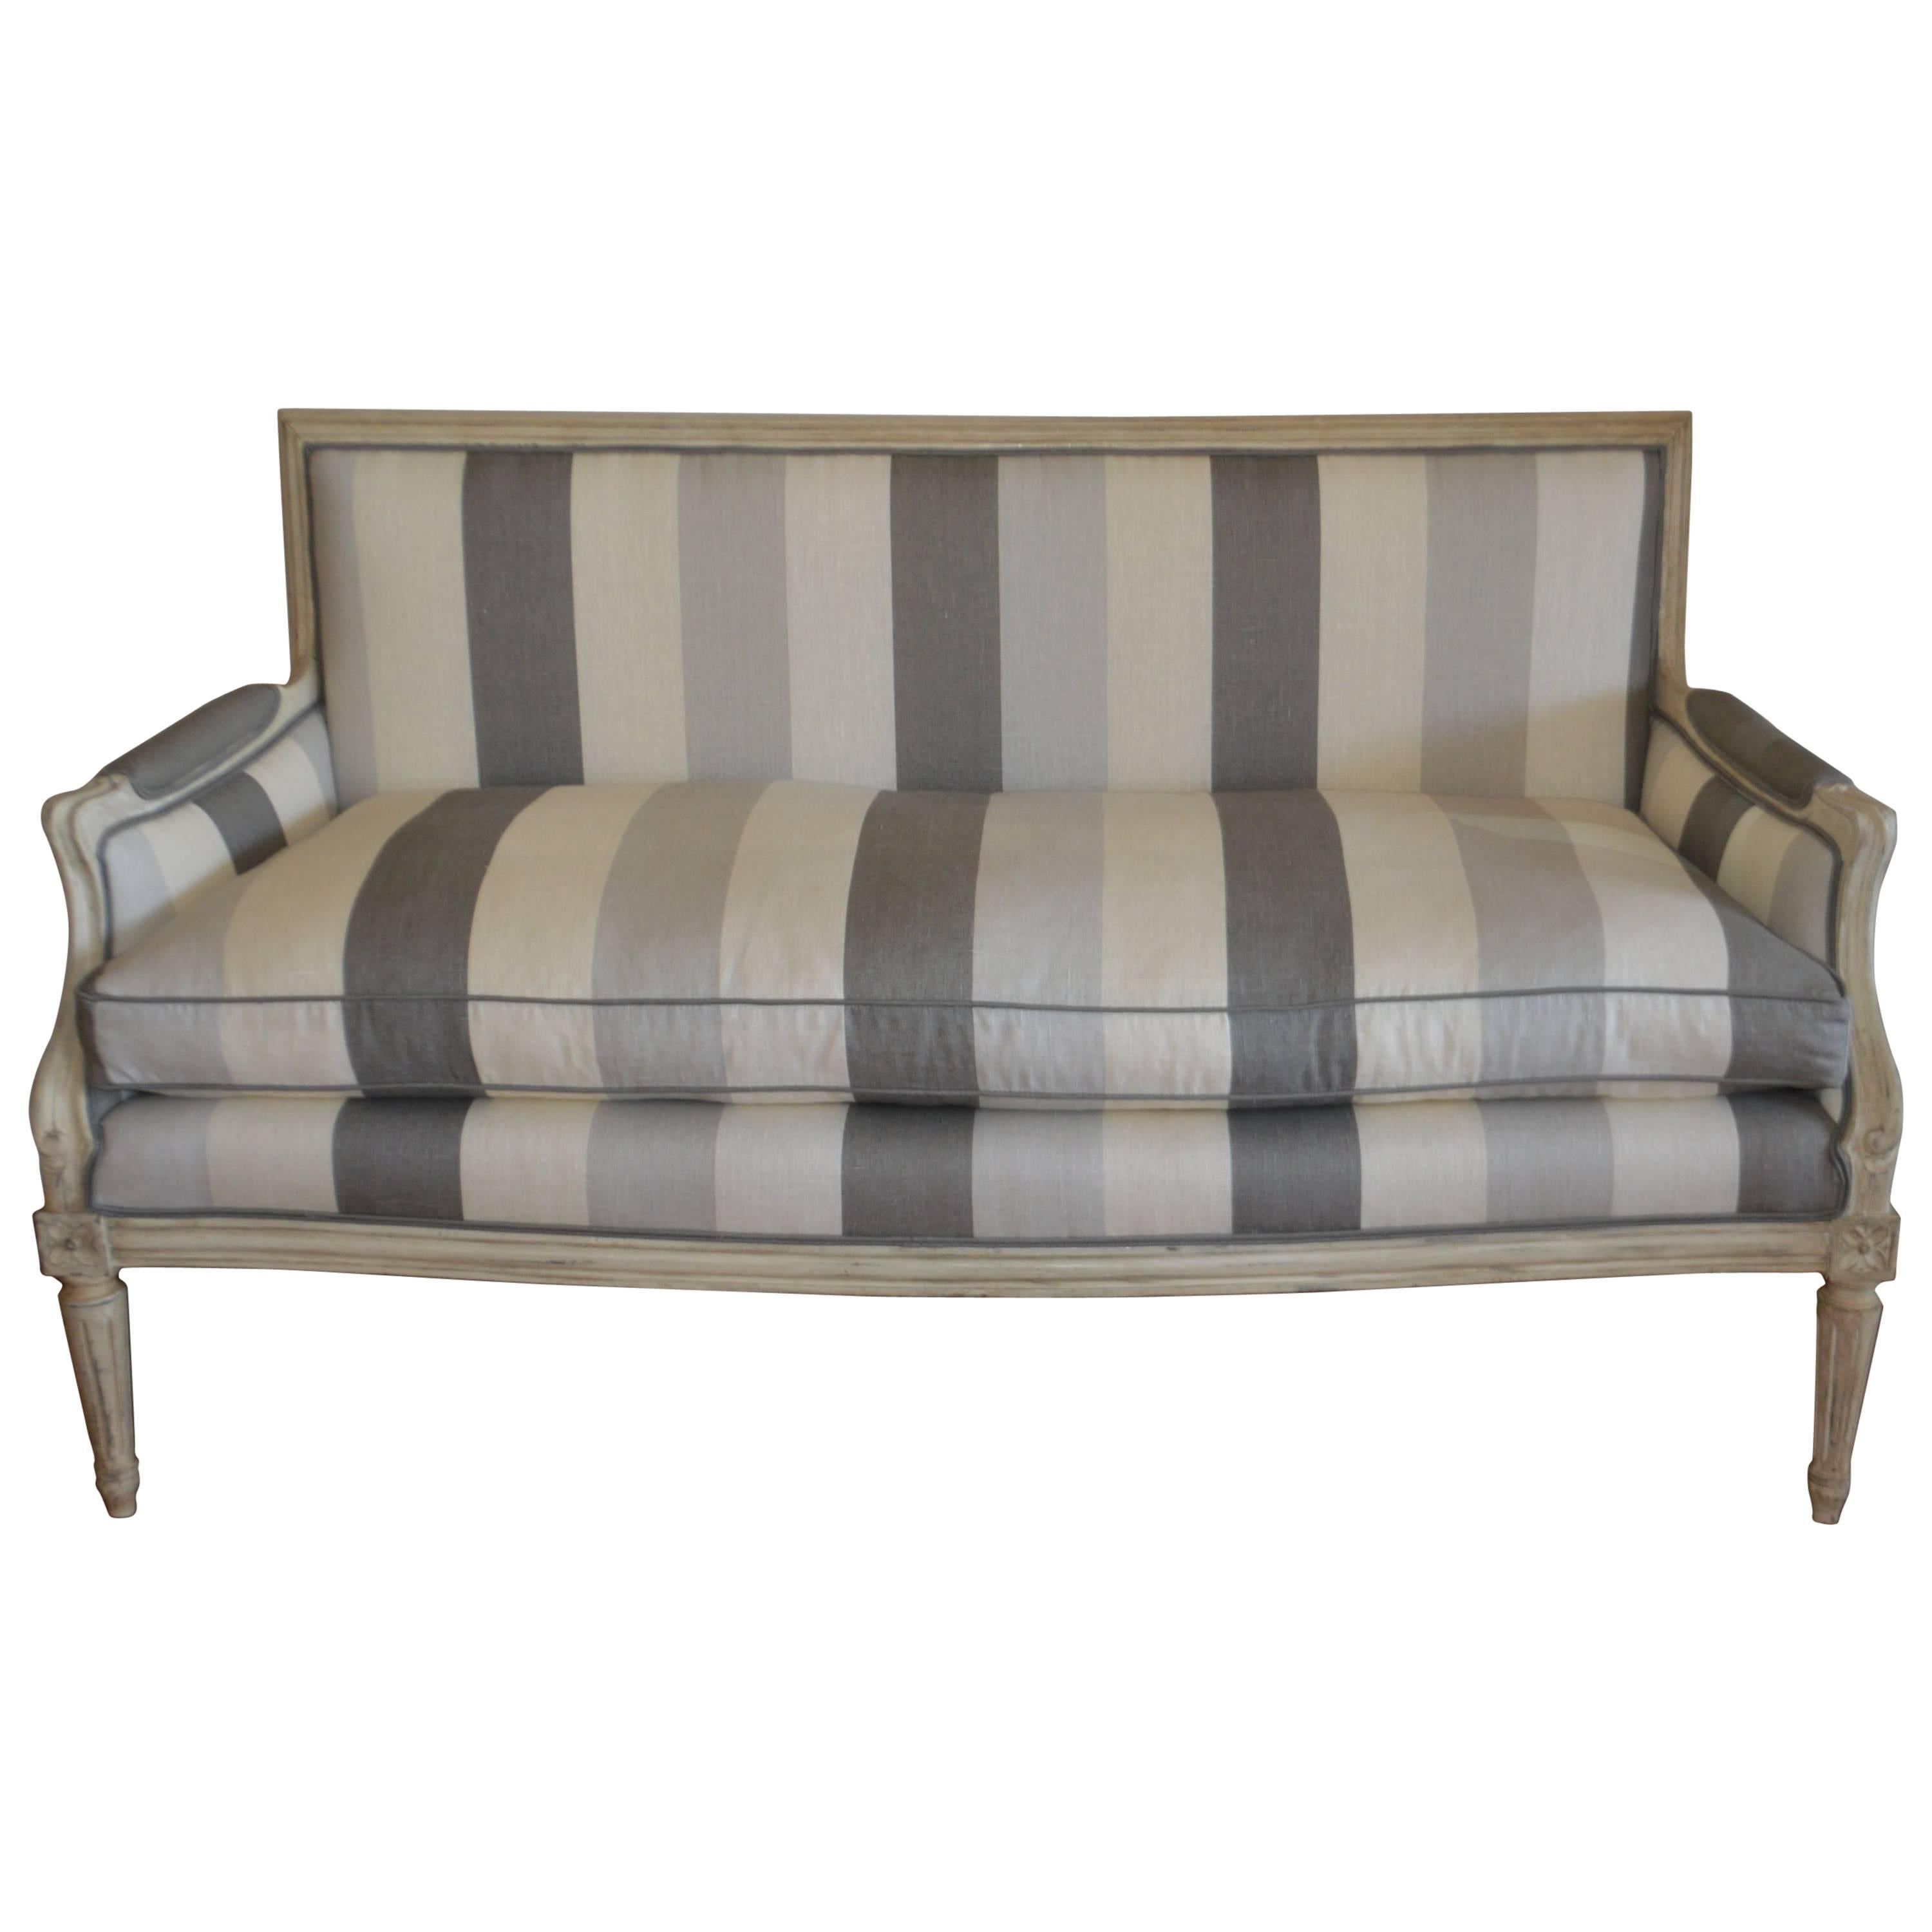 Louis XVI Style Painted Sofa with New Stripe Linen Fabric, Feather and Dawn Seat